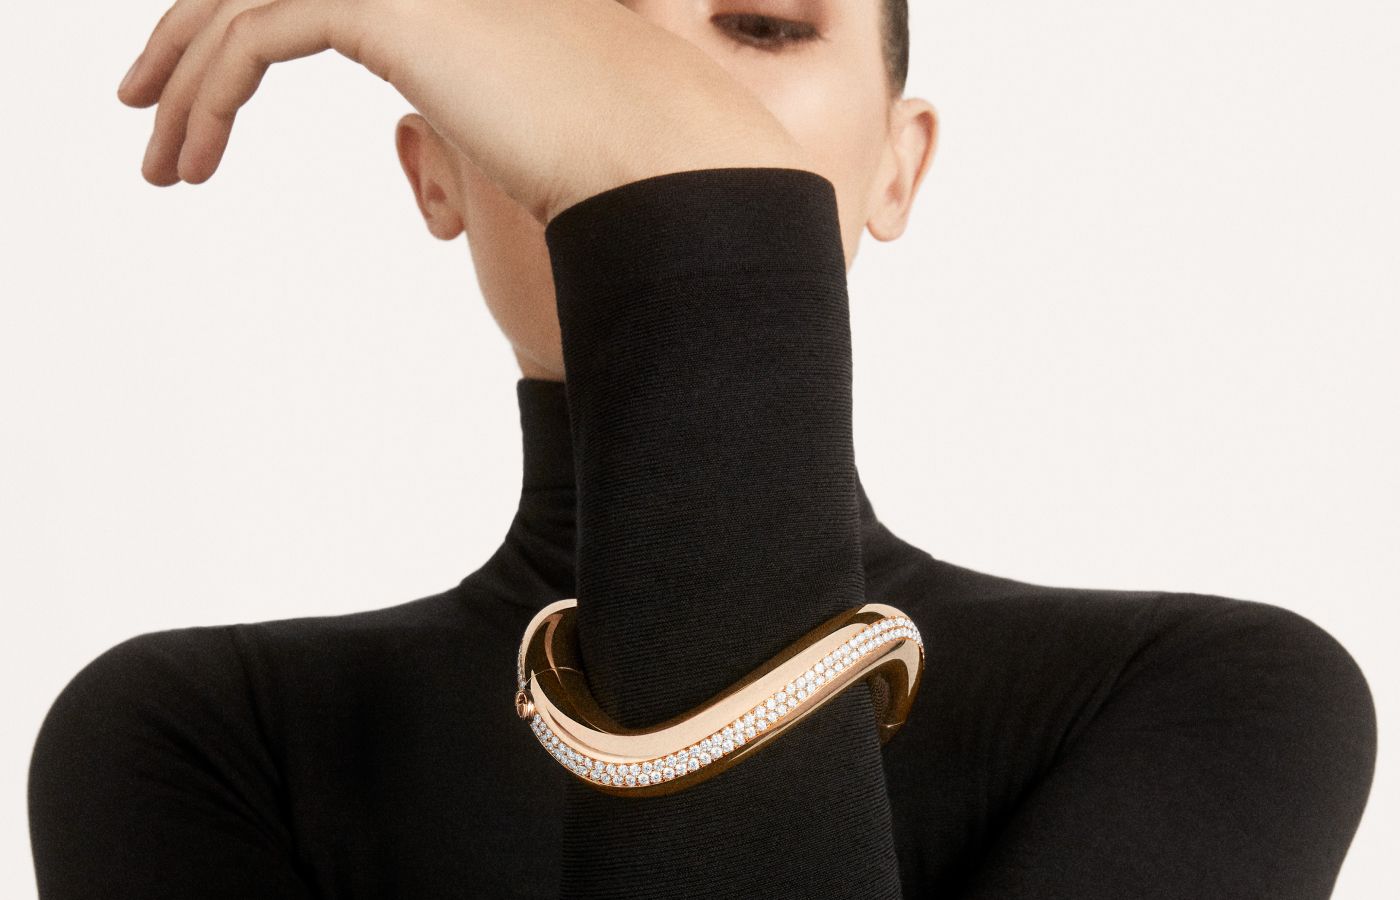  Model wearing Pomellato Dama bracelet in rose gold and diamonds from the Ode to Milan High Jewellery collection